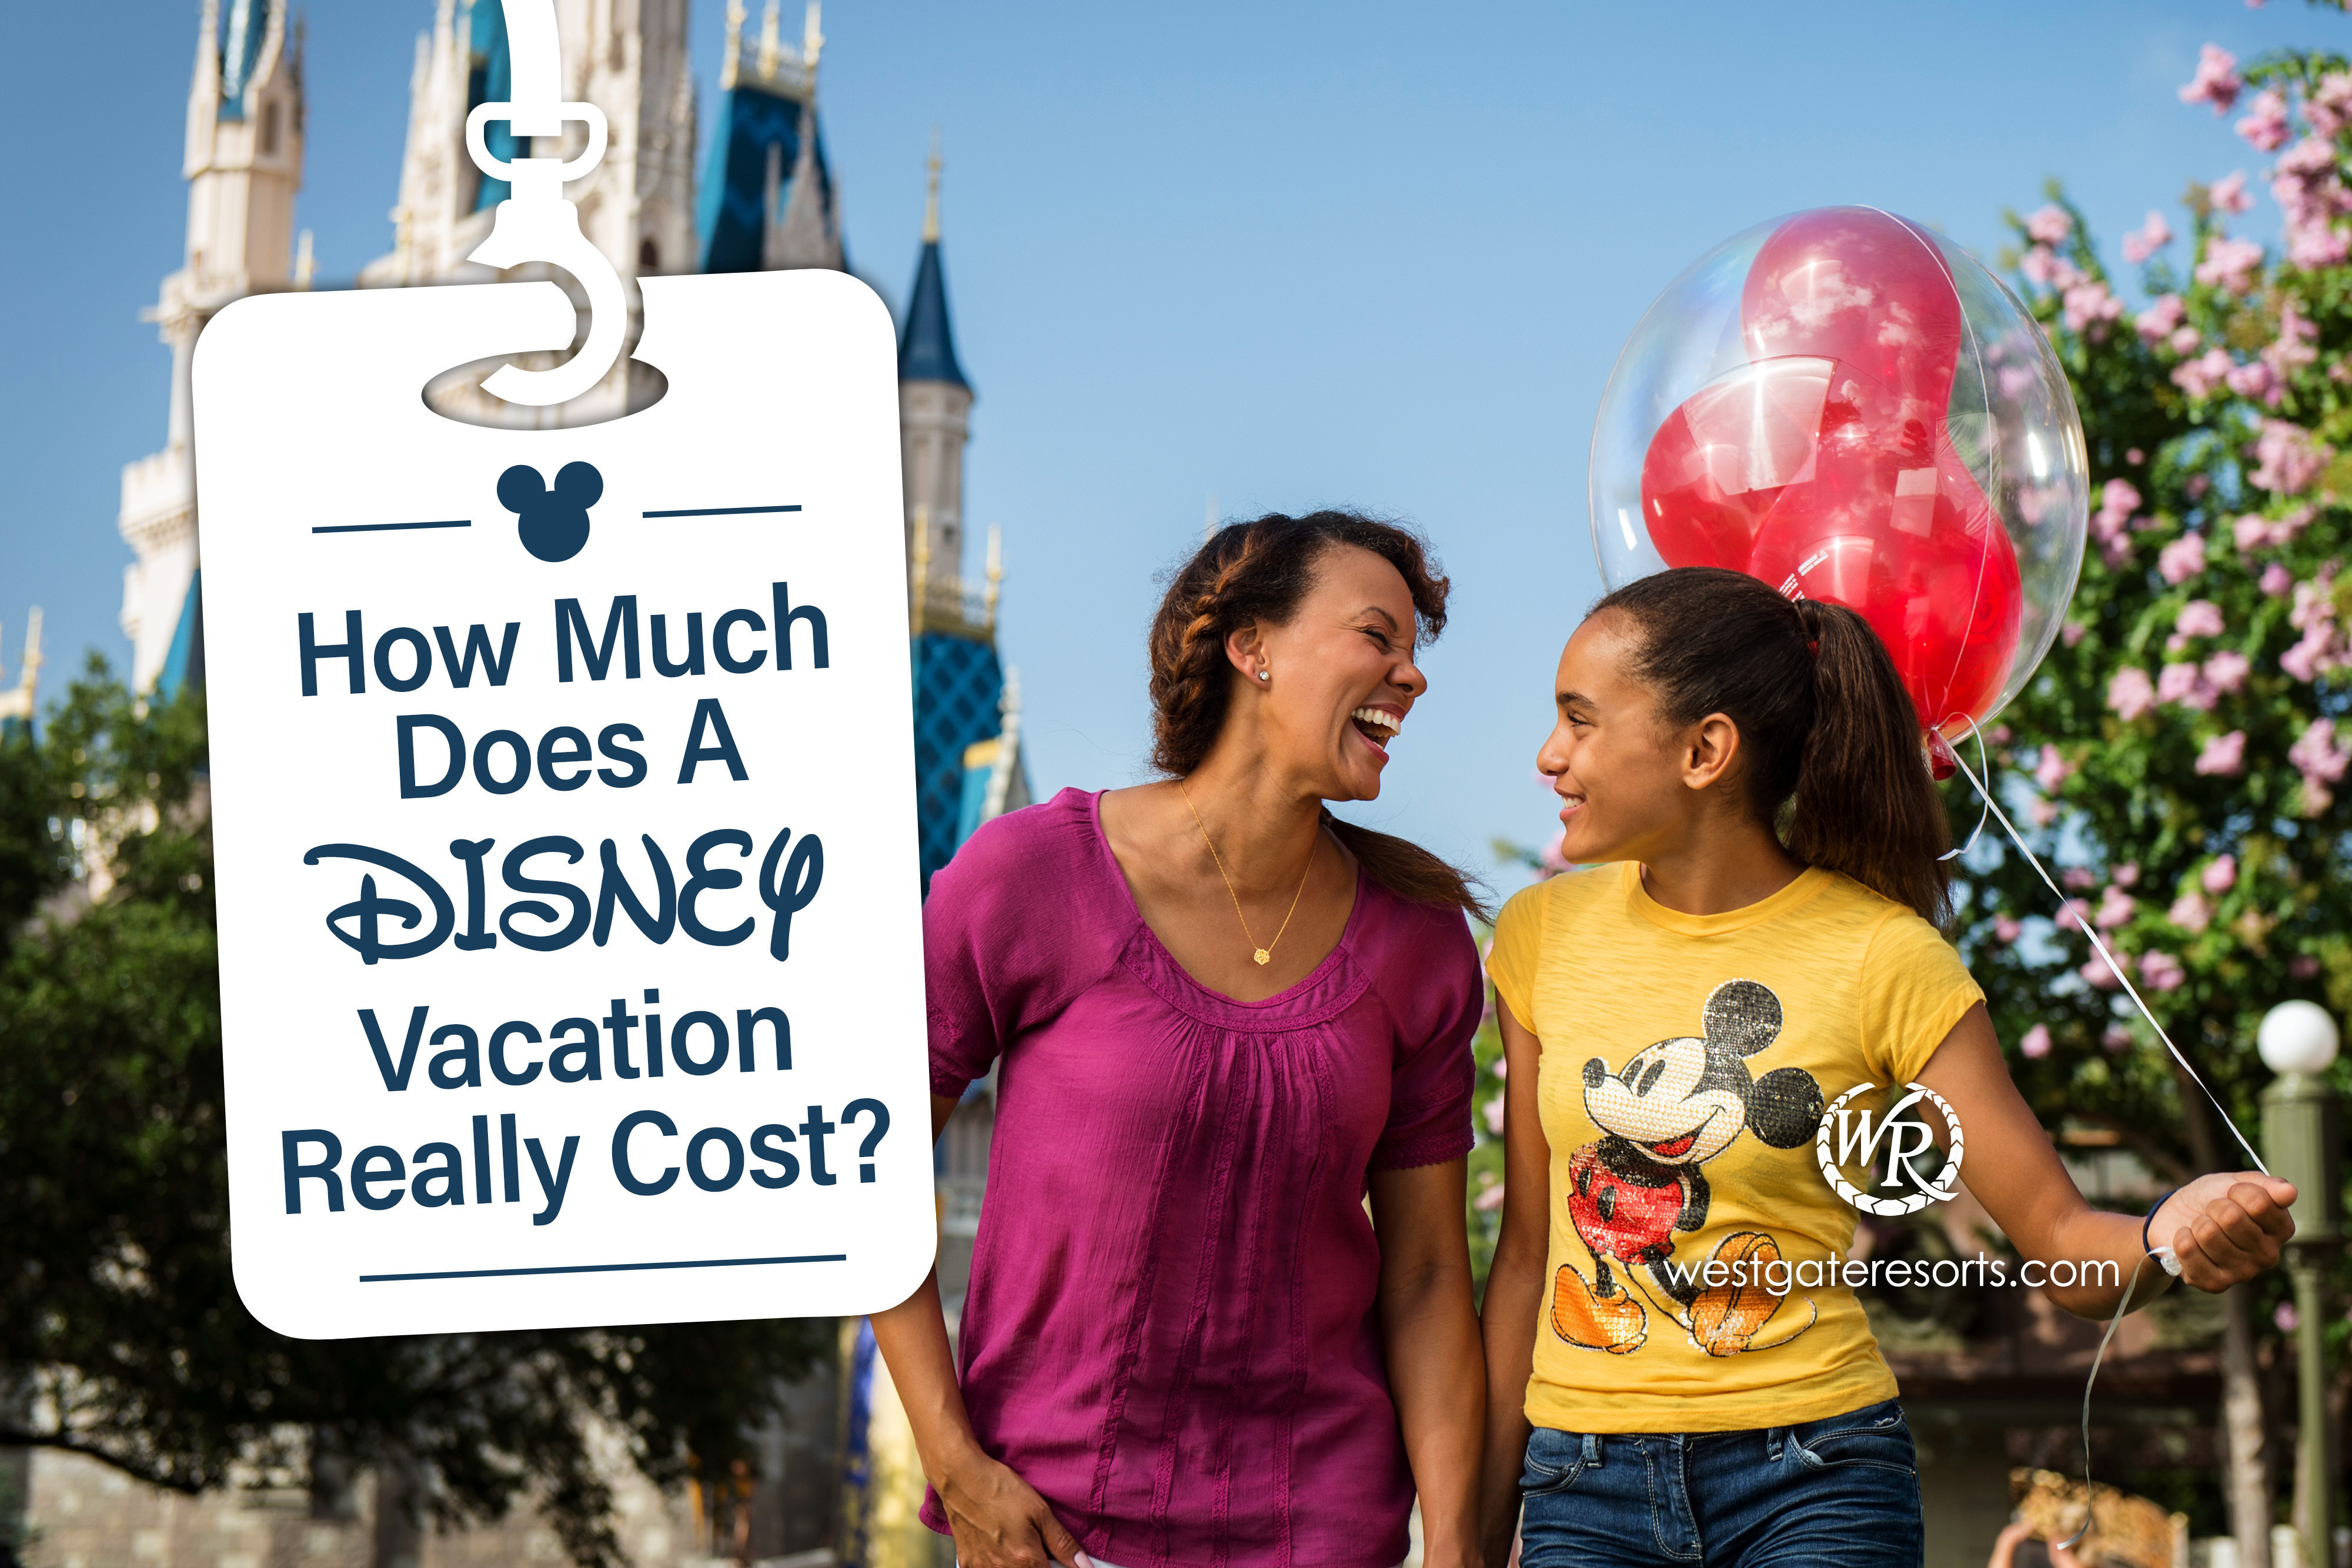 Vacation Education! How Much Does a Disney Vacation Cost (2021 Edition)?